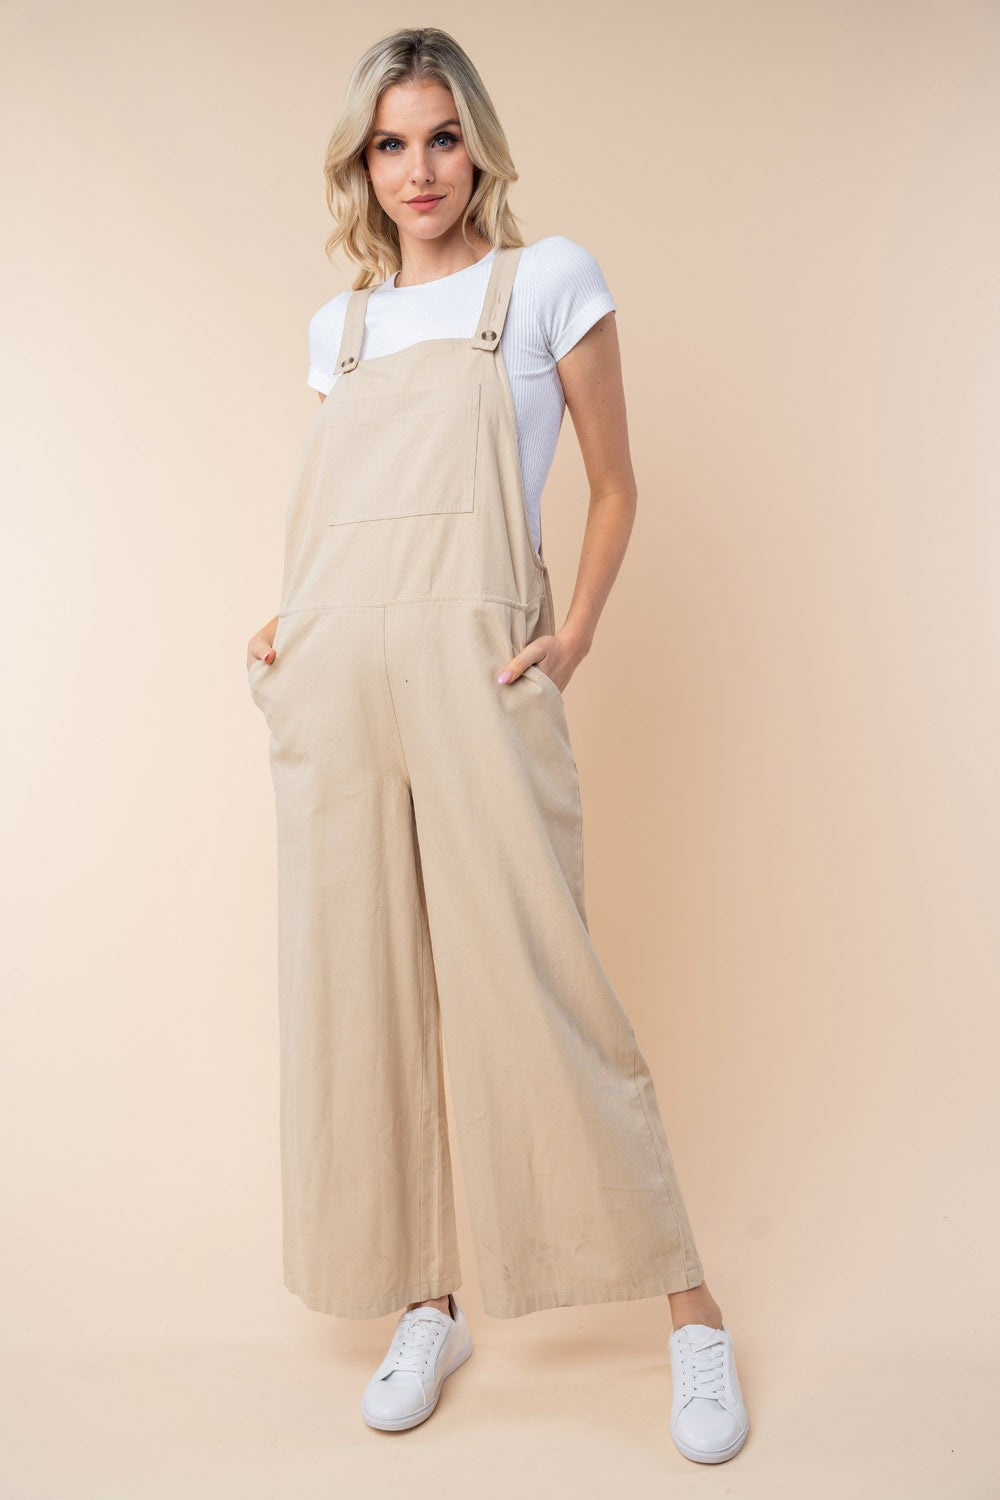 White Birch Sleeveless Wide Leg JumpsuitWhite Birch Sleeveless Wide Leg JumpsuitA Sleeveless Wide Leg Jumpsuit is a chic and versatile one-piece garment that features a sleeveless top with wide-leg pants. This style combines the comfort of a jumClothingTrendsiLive Online MallWhite Birch Sleeveless Wide Leg Jumpsuit